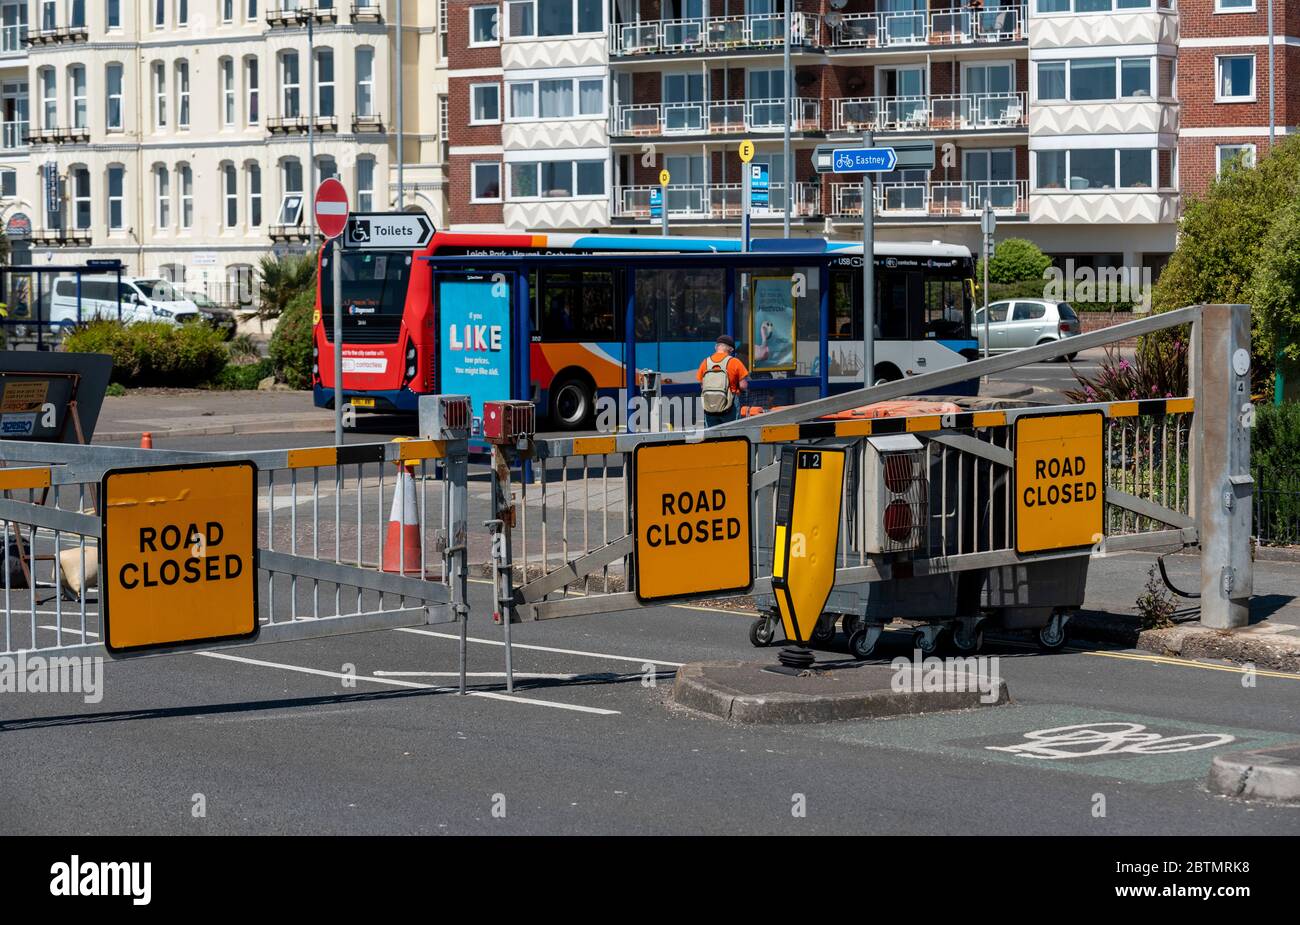 Southsea, Portsmouth, England, UK, May 2020. The seafront road in Southsea a coastal resort closed to traffic during Covid-19 outbreak Stock Photo